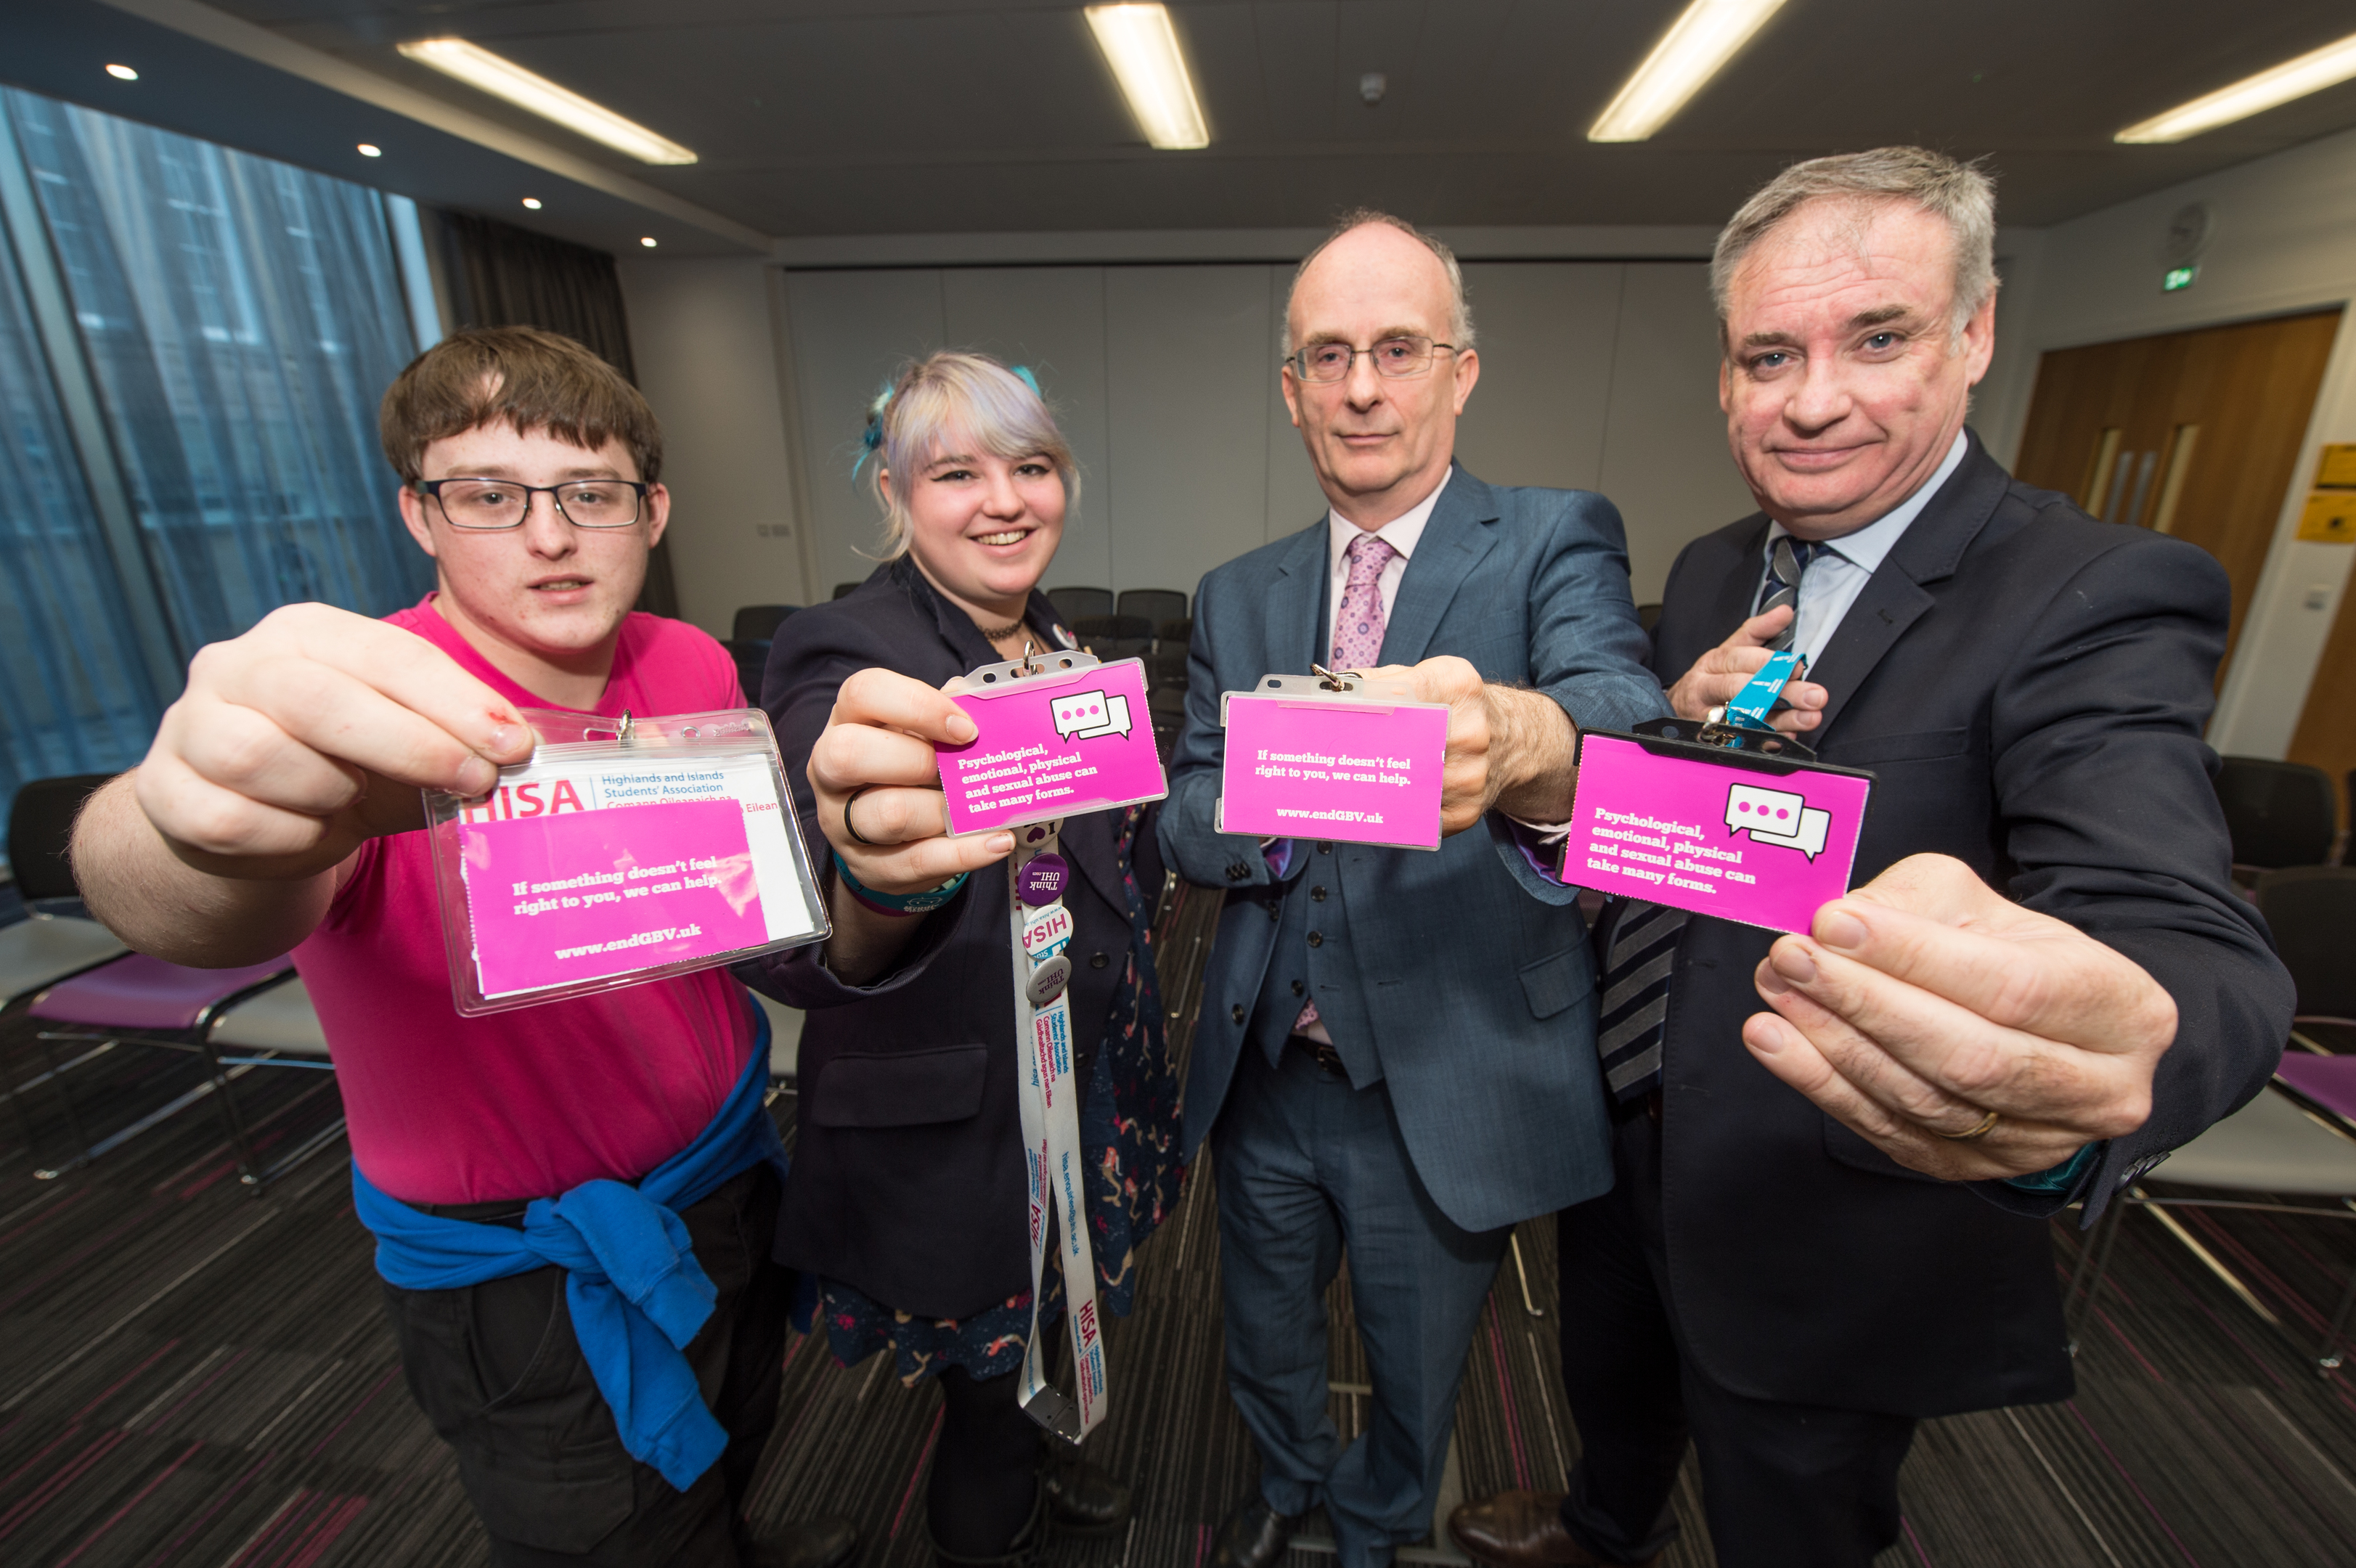 Nathan Sanderson, local officer for Highlands and Islands Student Association, Manon Wells Jesus, local officer for HISA, Moray College principal David Patterson and Minister for Further Education and Higher Education, Richard Lochhead, launch the cards at Moray College UHI.